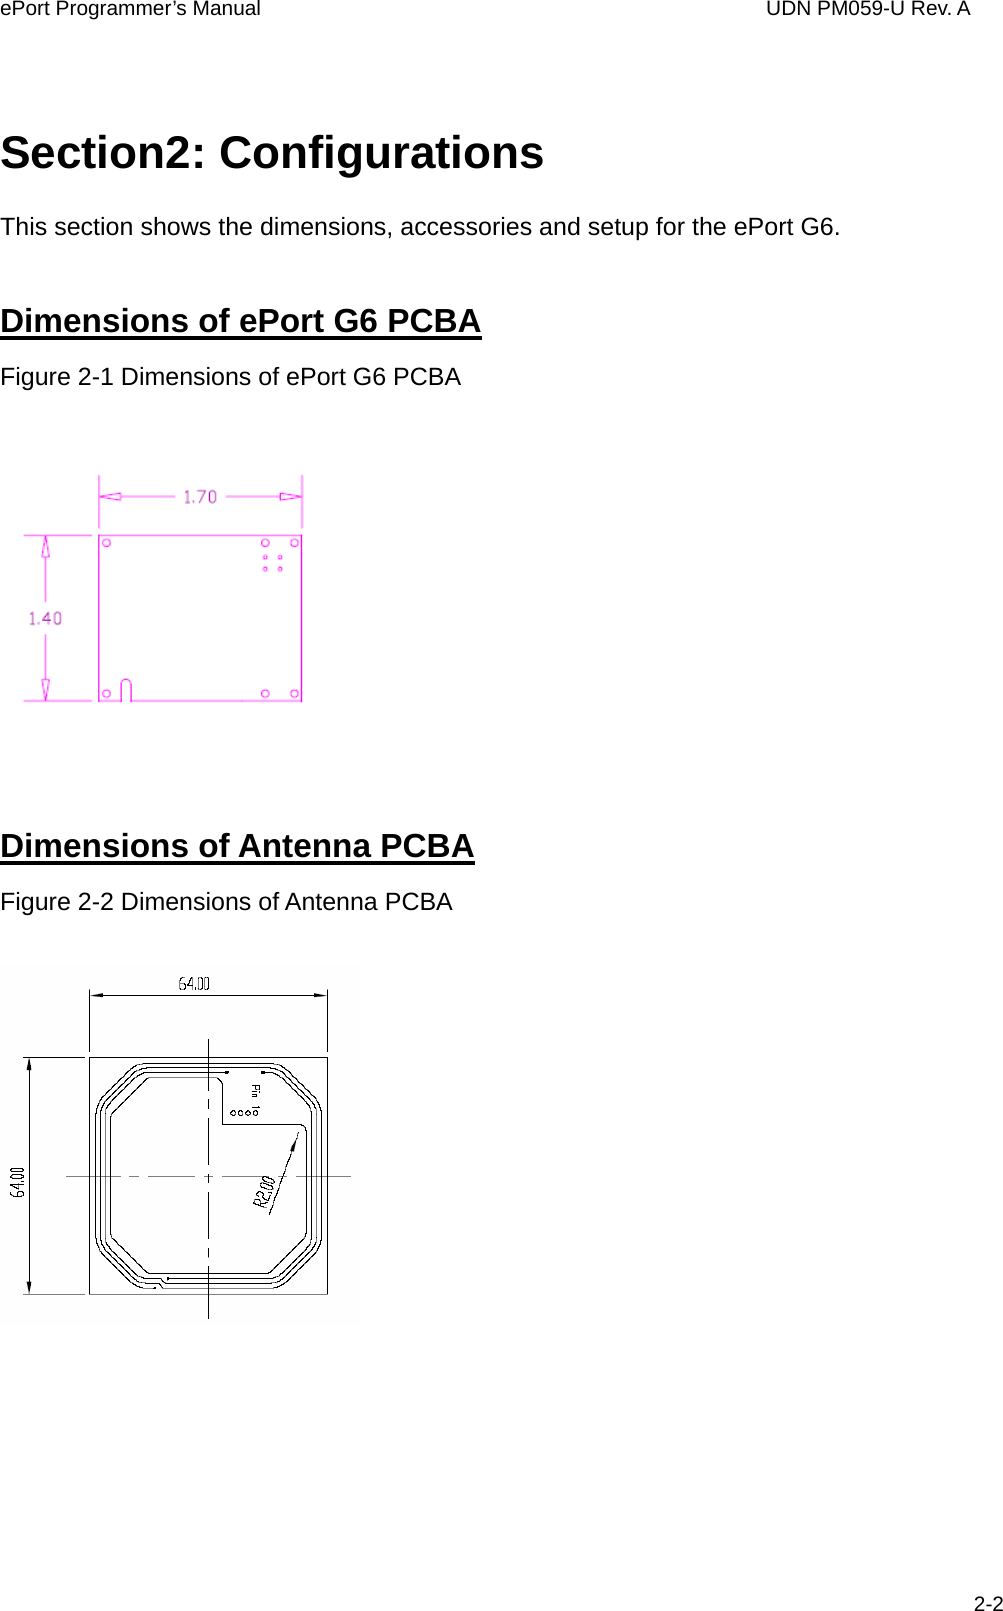 ePort Programmer’s Manual                                  UDN PM059-U Rev. A  2-2 Section2: Configurations This section shows the dimensions, accessories and setup for the ePort G6. Dimensions of ePort G6 PCBA Figure 2-1 Dimensions of ePort G6 PCBA         Dimensions of Antenna PCBA Figure 2-2 Dimensions of Antenna PCBA     